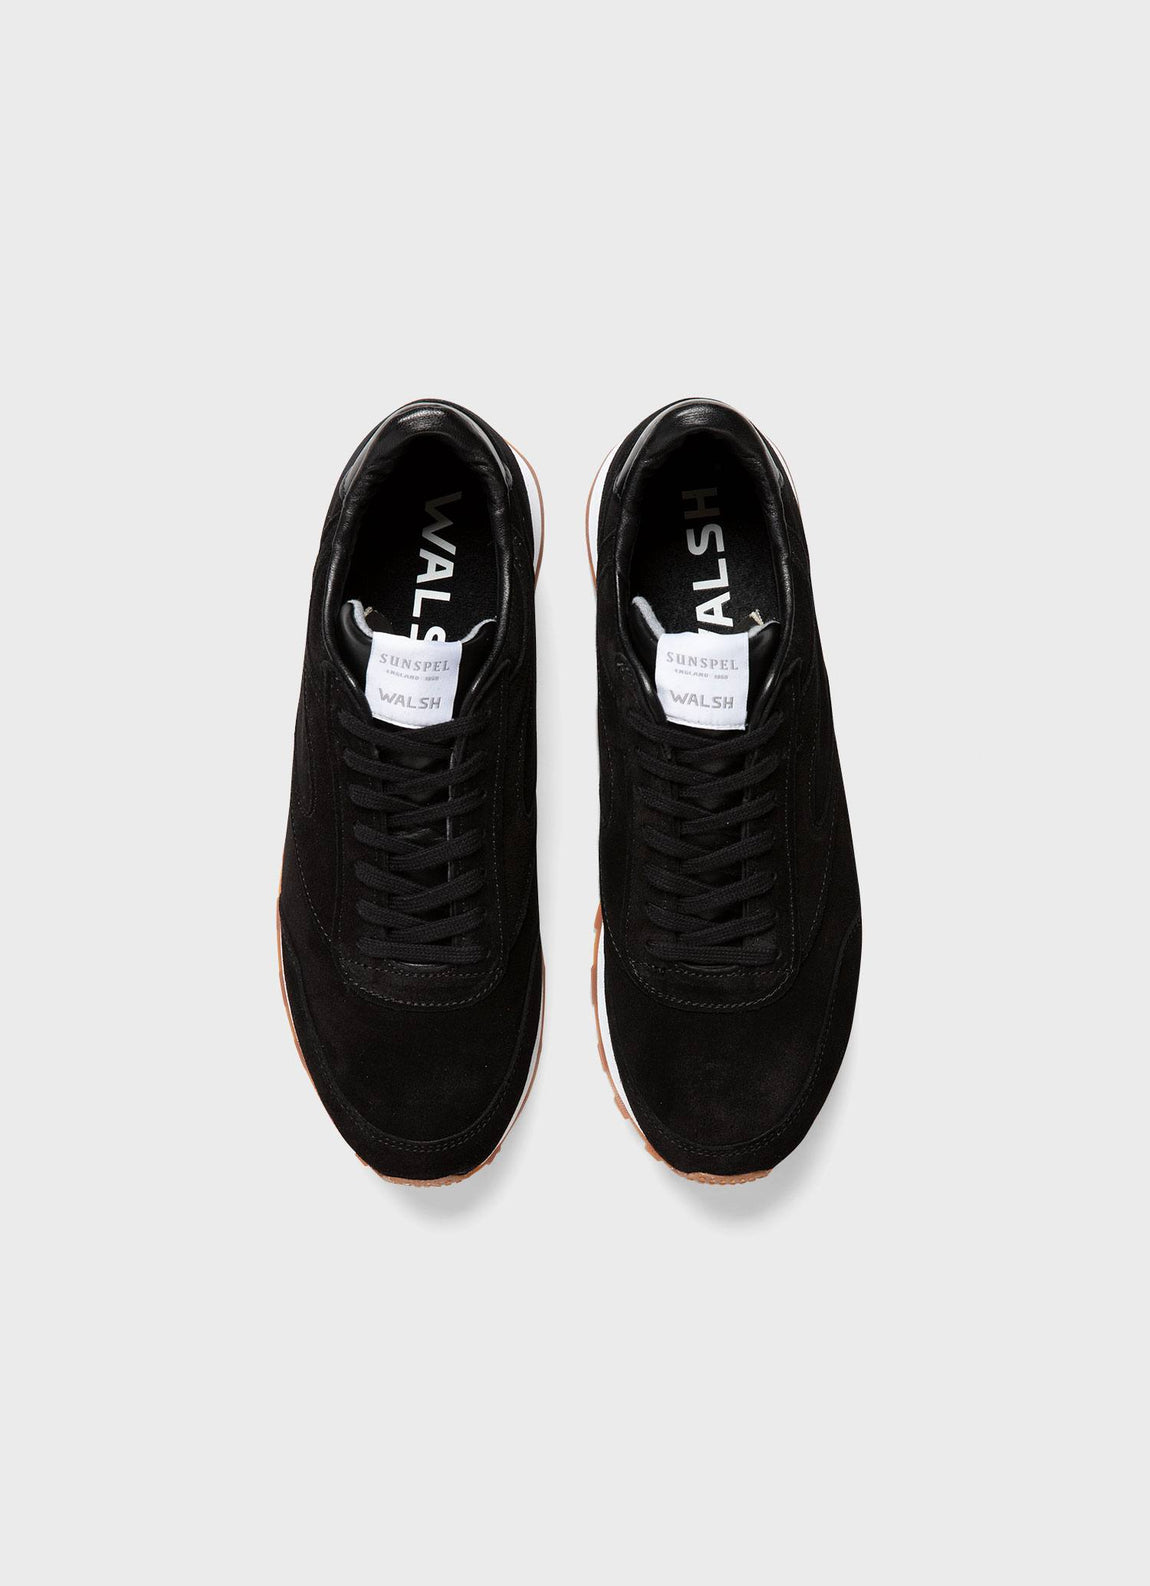 Men's Sunspel and Walsh Trainer in Black